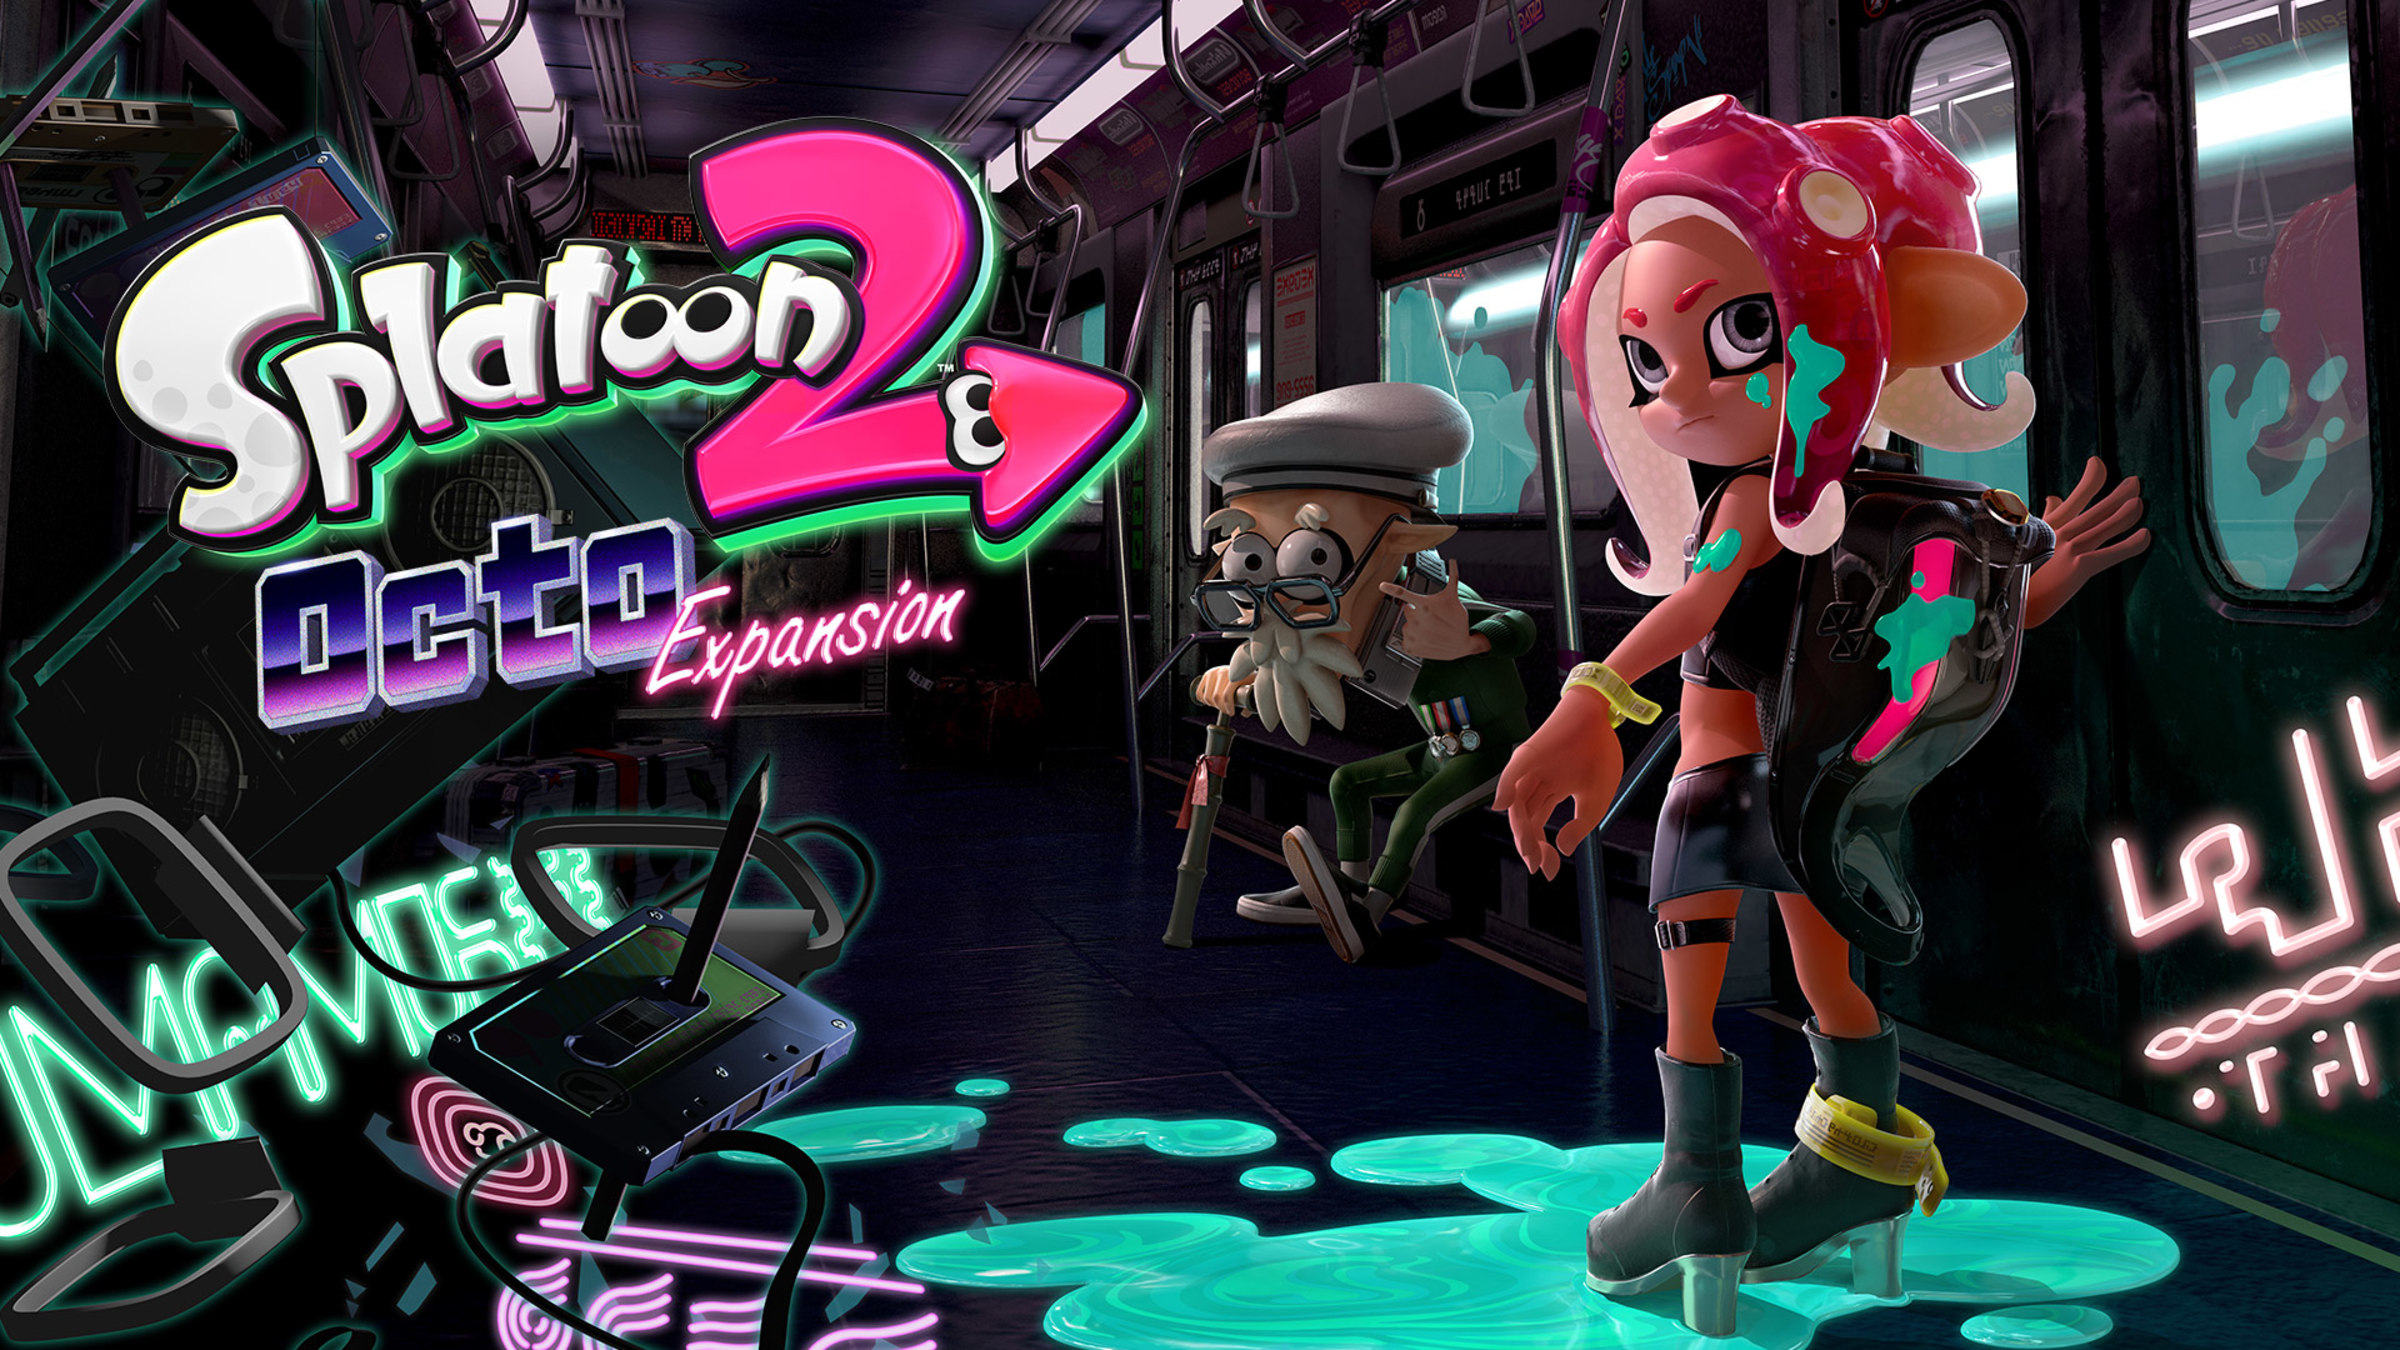 Splatoon™ 2: Site Nintendo Official Expansion Nintendo for Switch Octo 